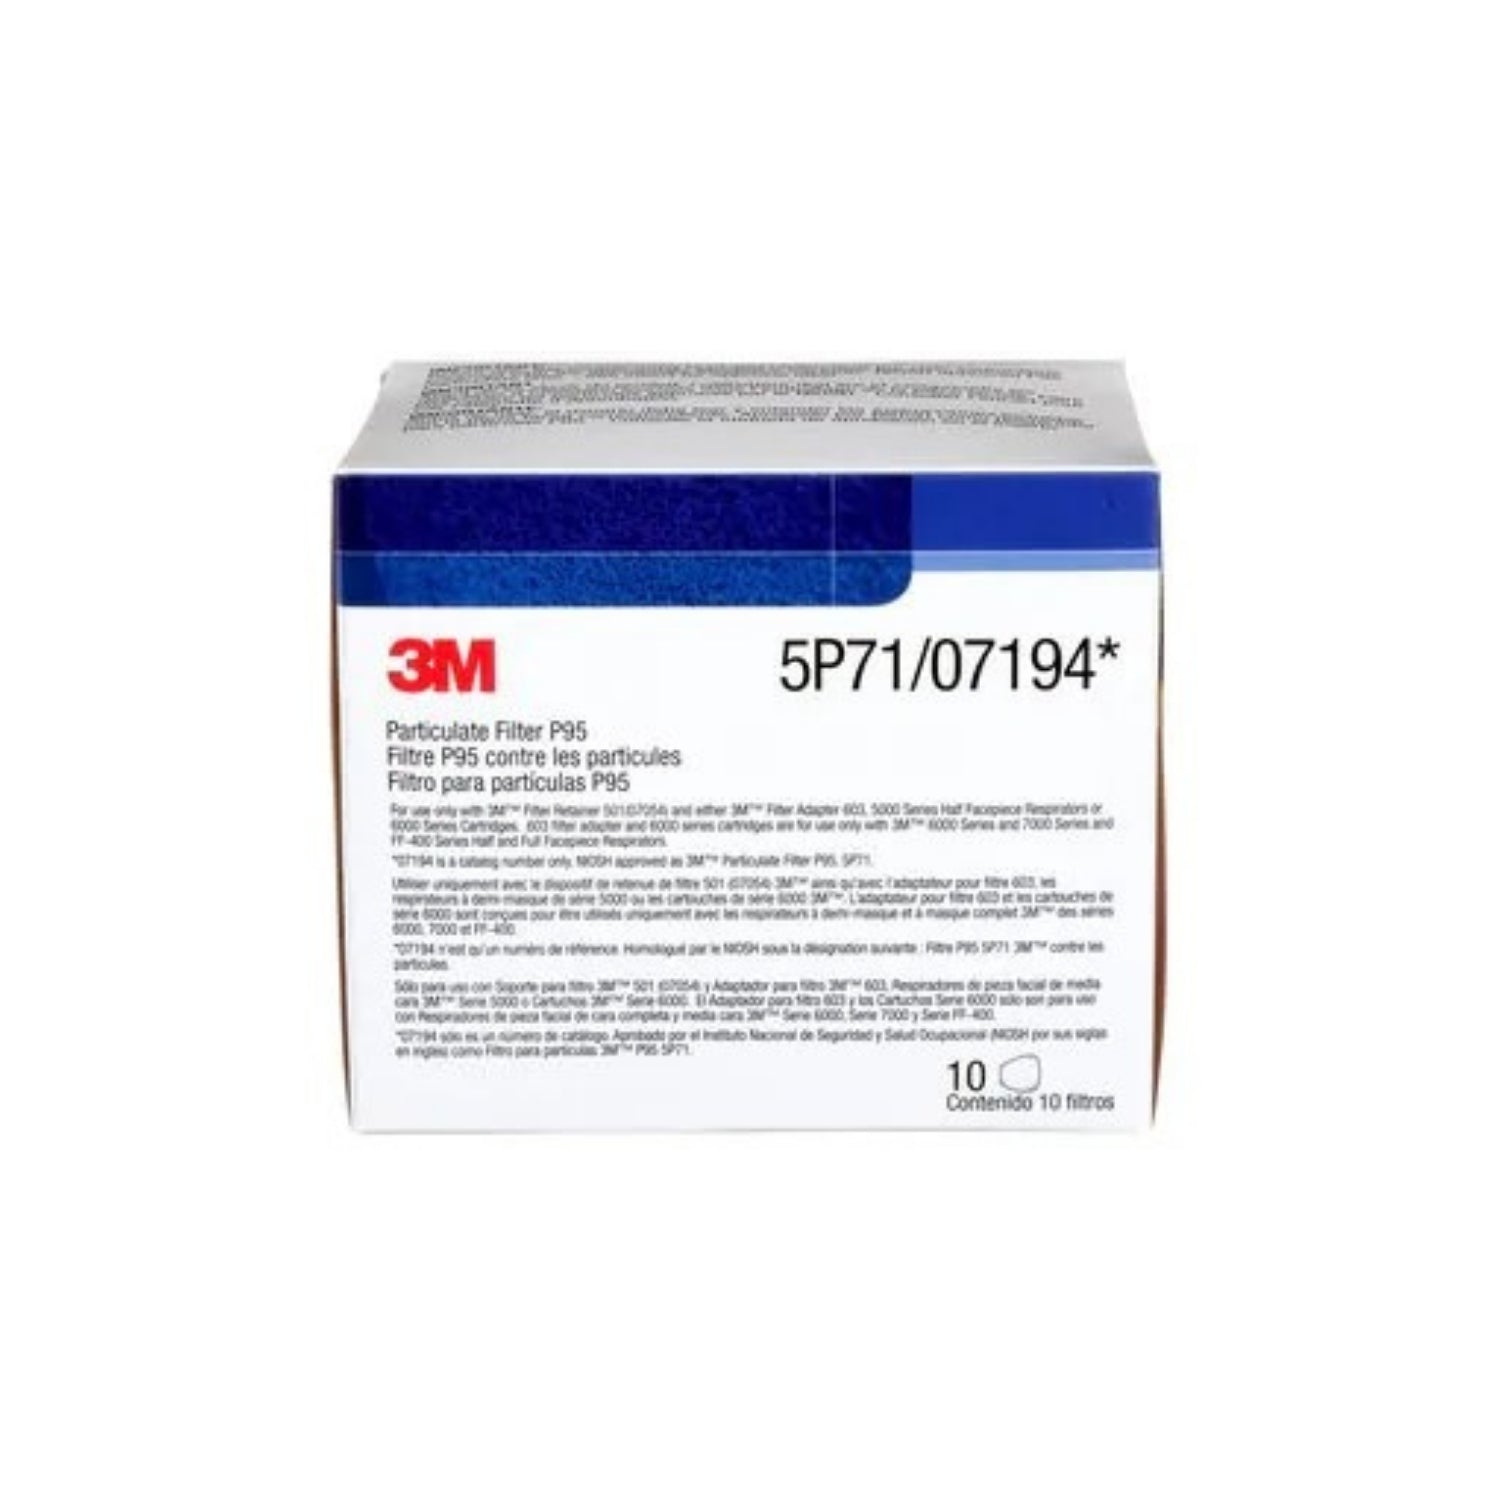 3M™ Particulate Filter 5P71/07194(AAD), P95 100 - Certain Oil/Non-Oil Particles